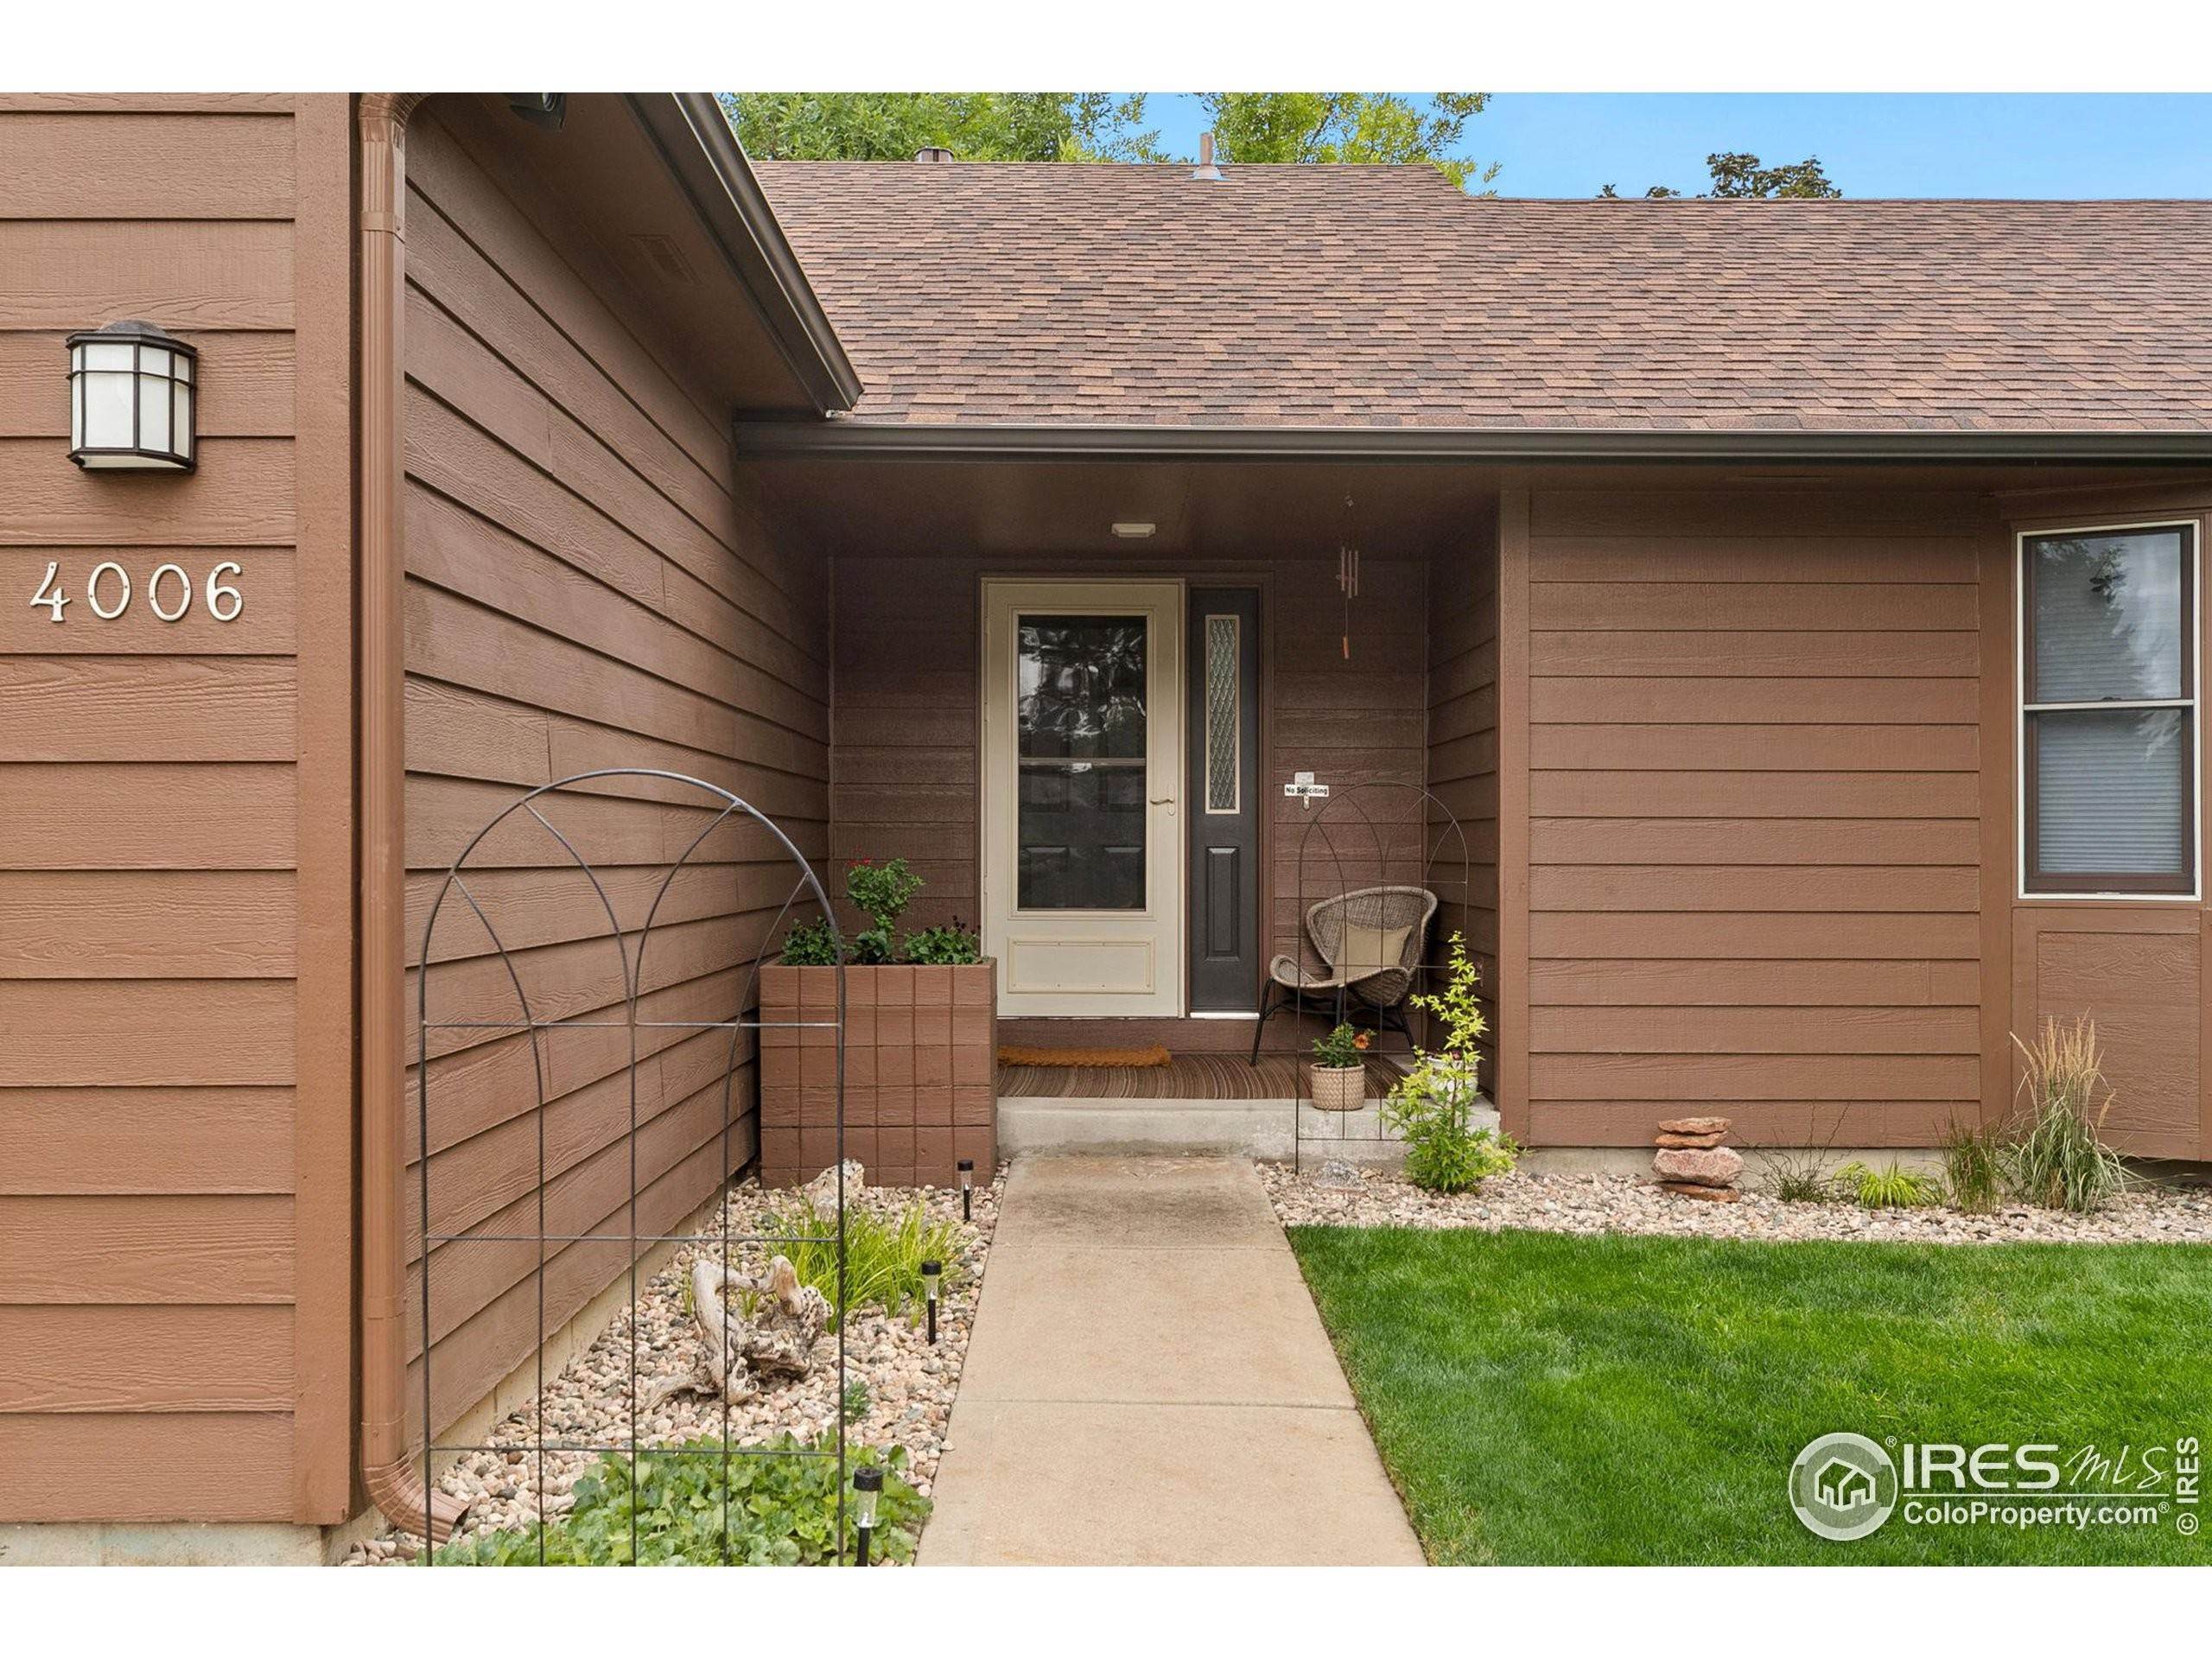 2. Single Family Homes for Active at 4006 Granite Court Fort Collins, Colorado 80526 United States